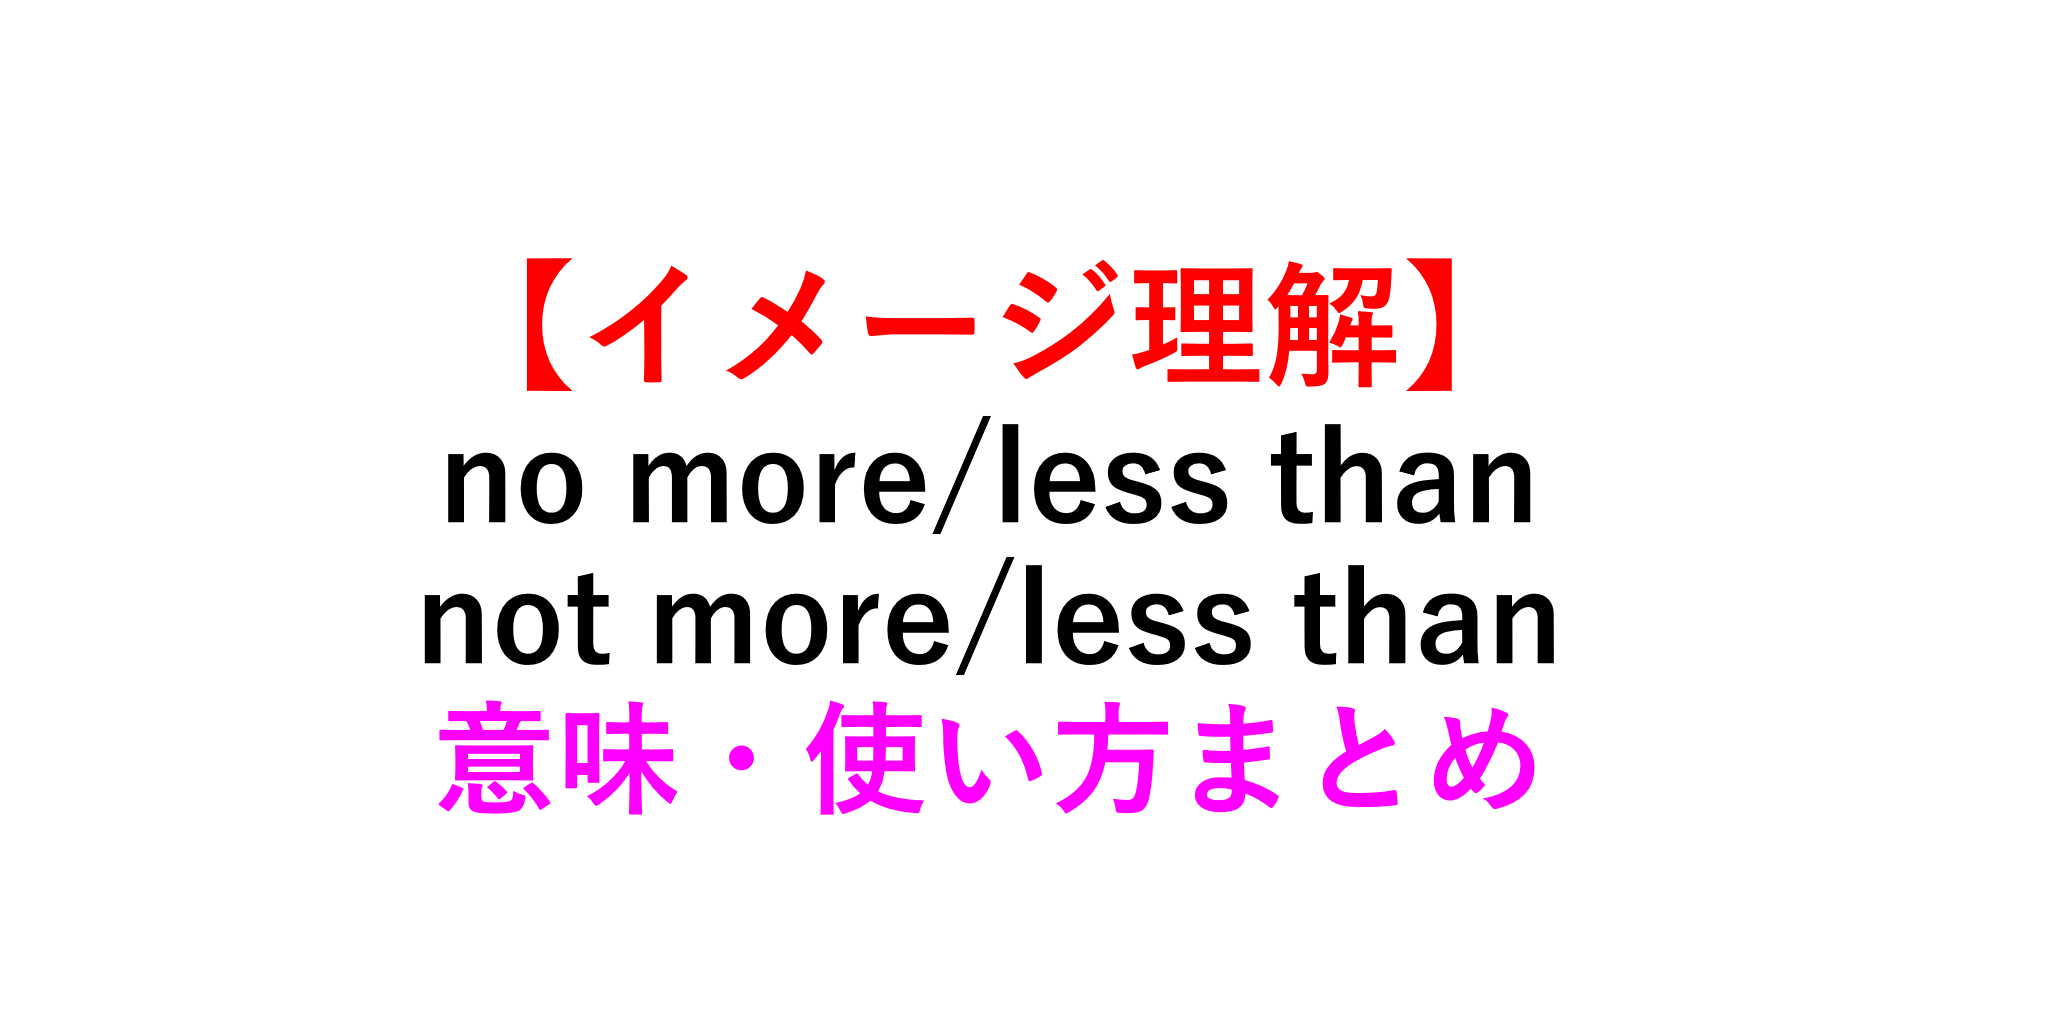 Nothing more thanとnothing less thanの違いは何ですか？